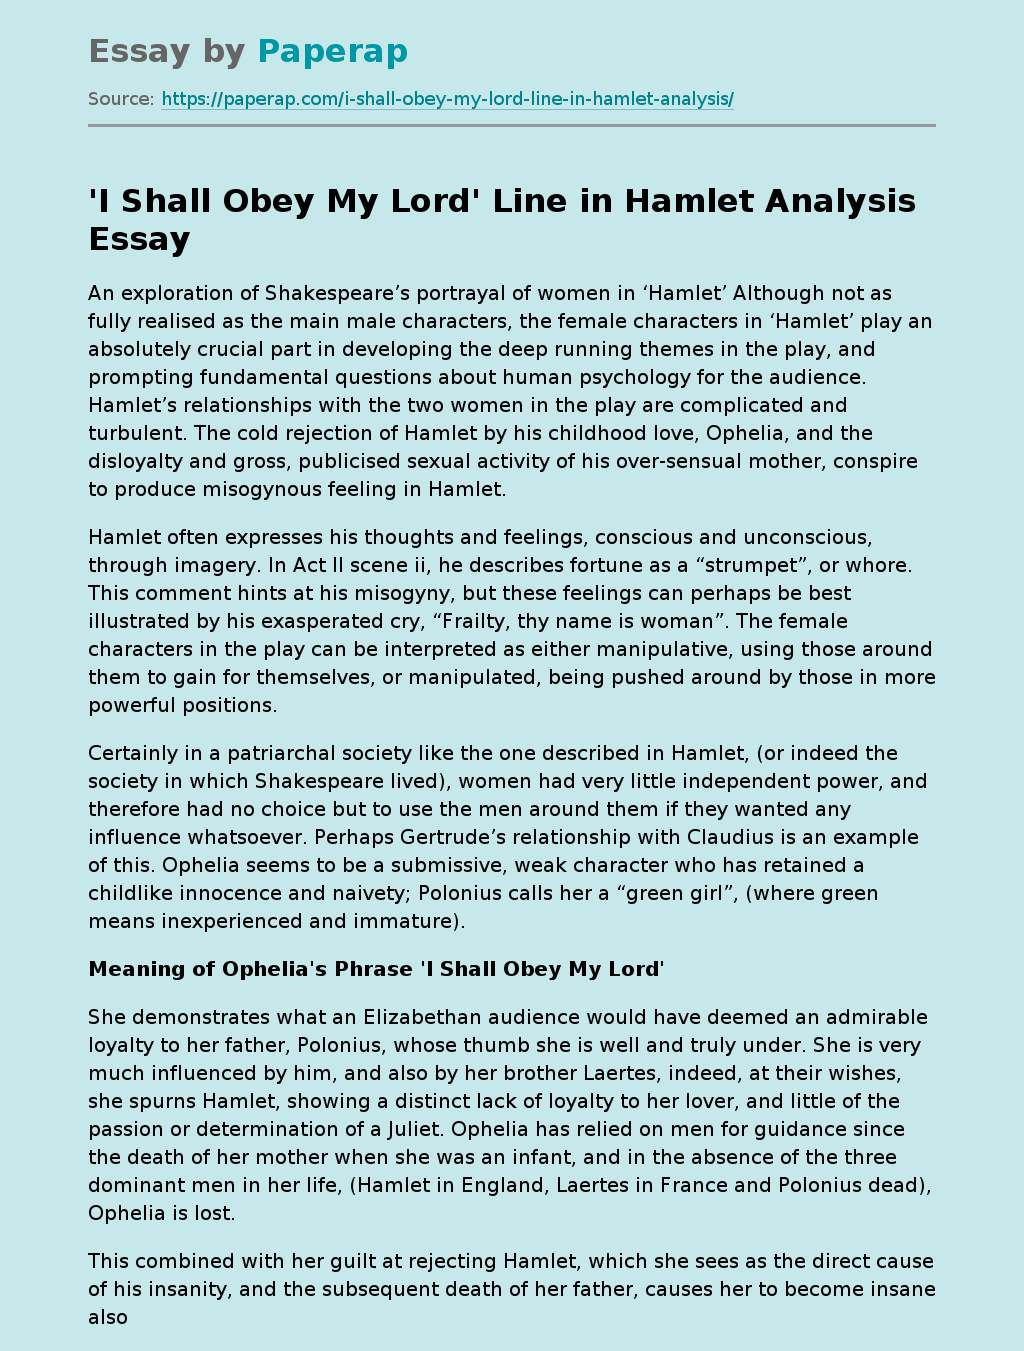 'I Shall Obey My Lord' Line in Hamlet Analysis